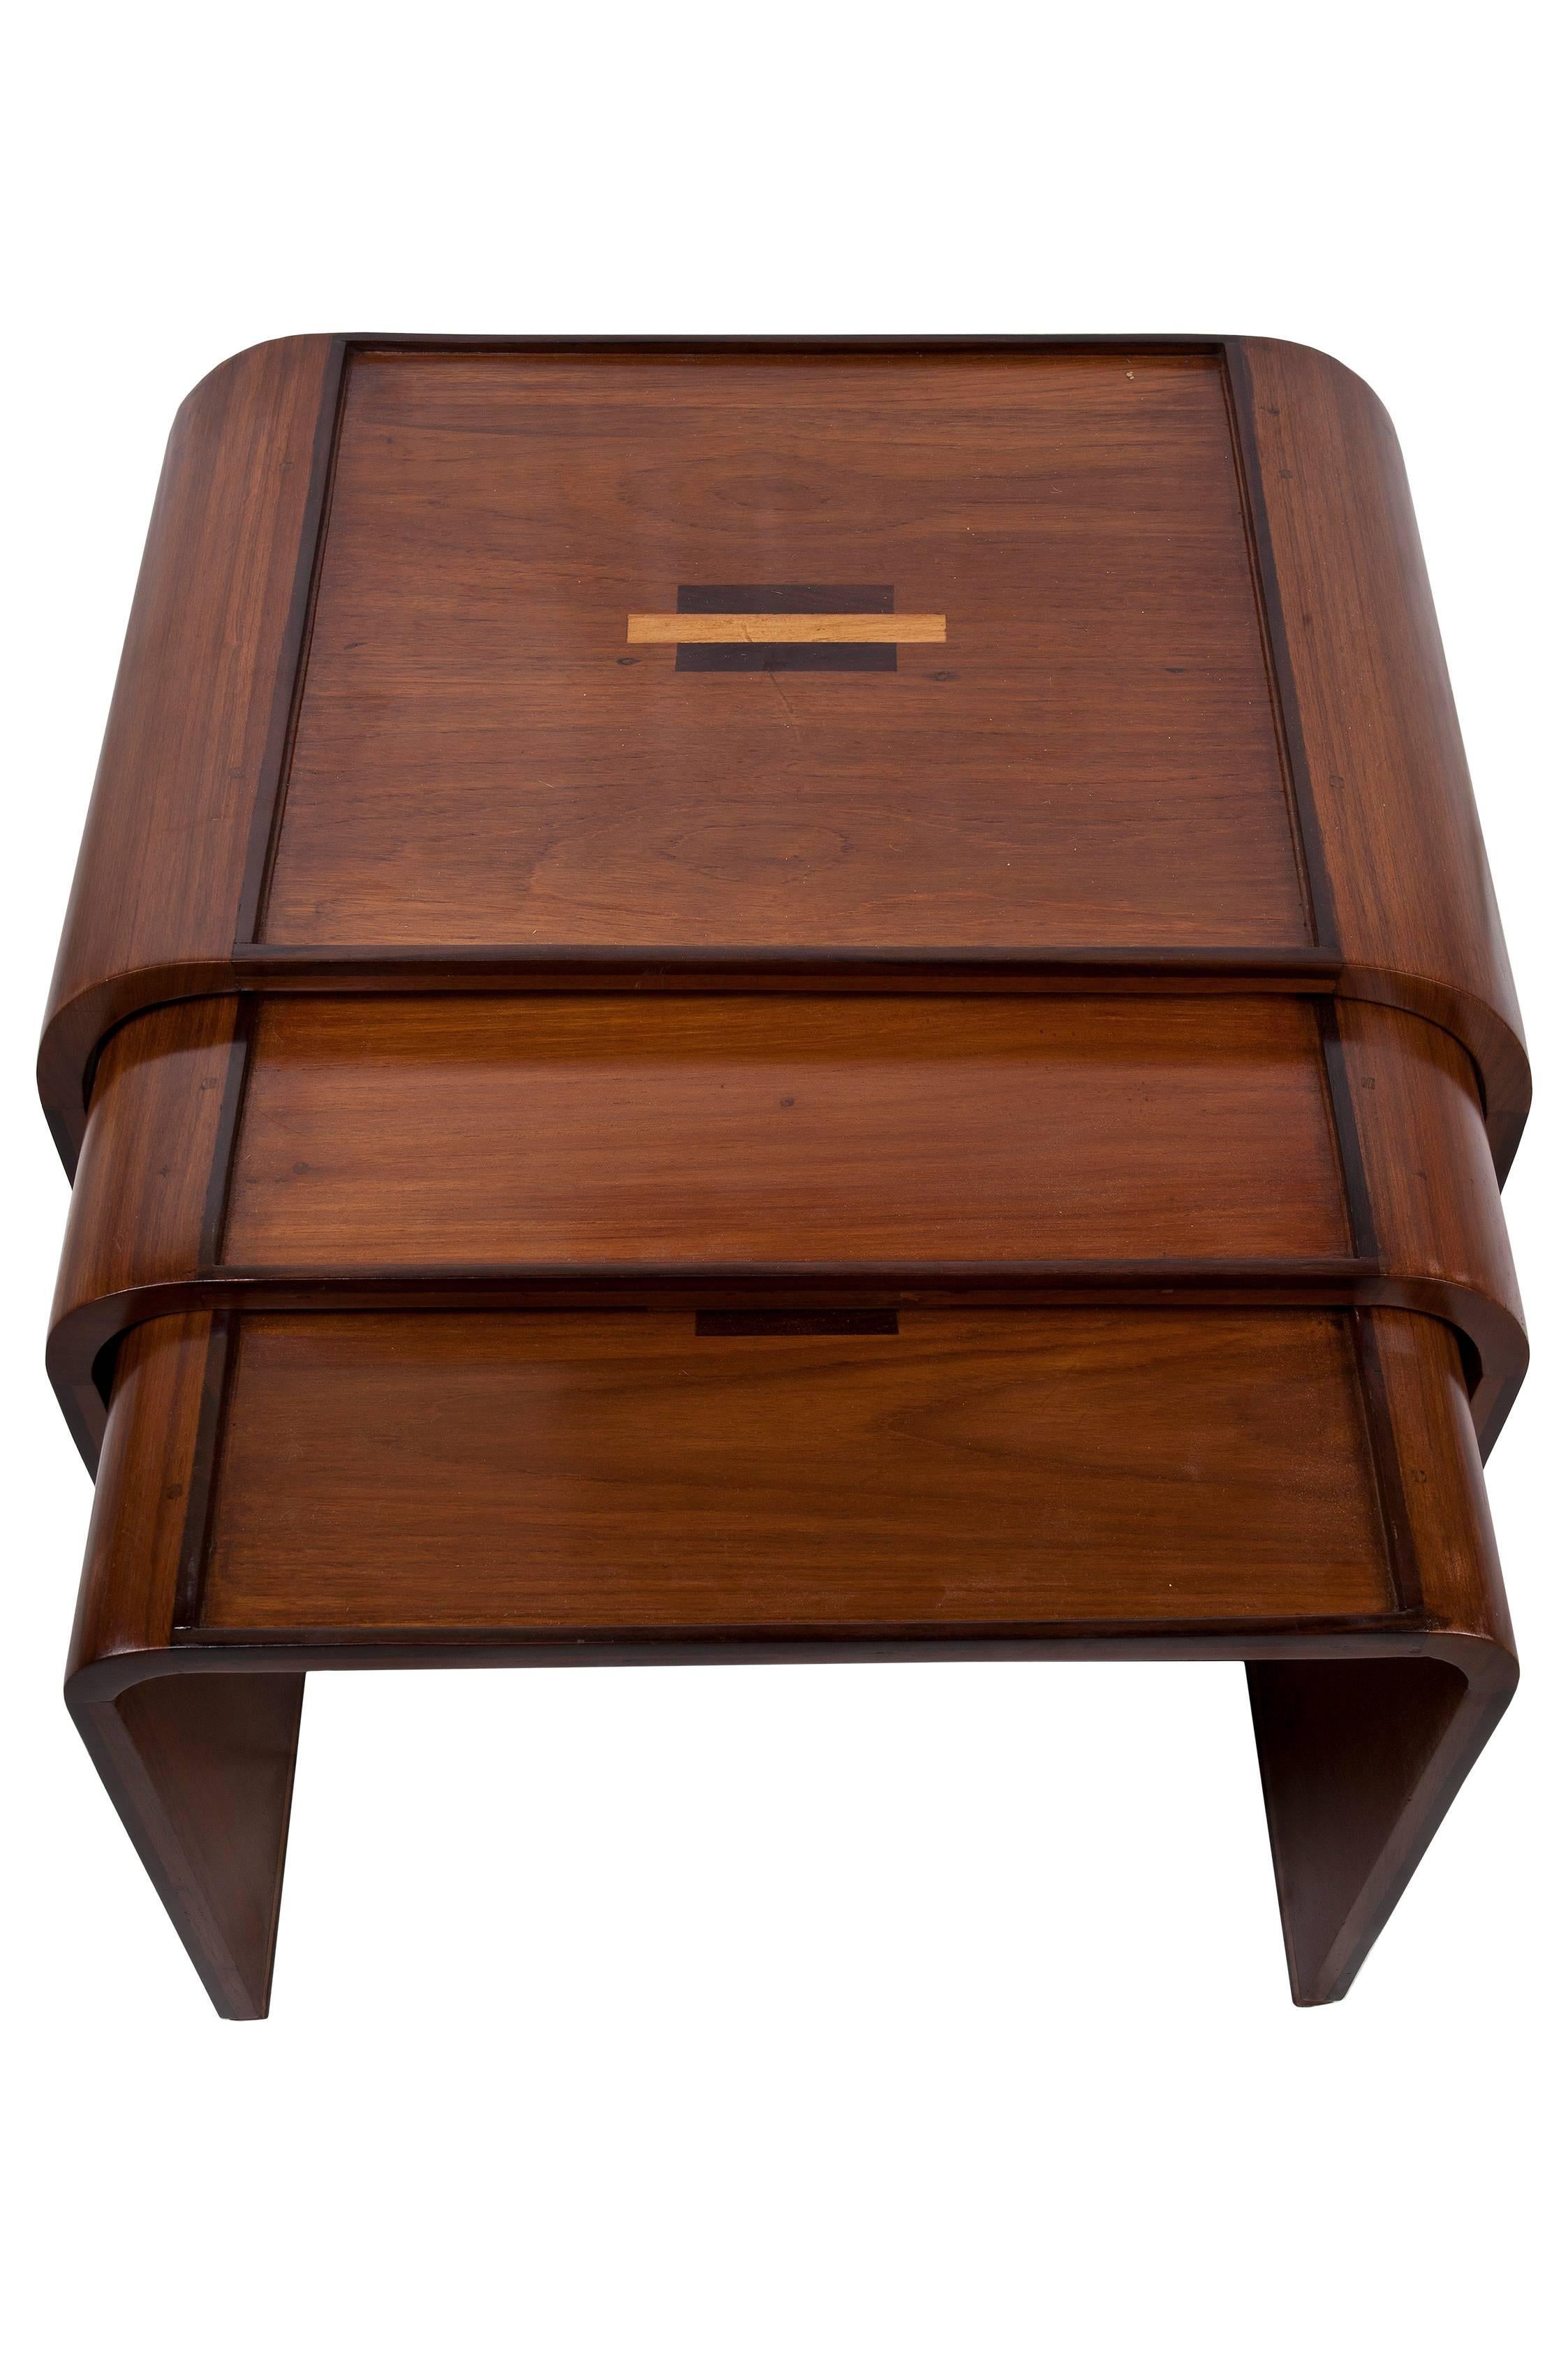 A set of Art Deco mahogany nesting tables with teak and rosewood inlay, late 1940s. Listed measurements are for the largest table, others are 22.5